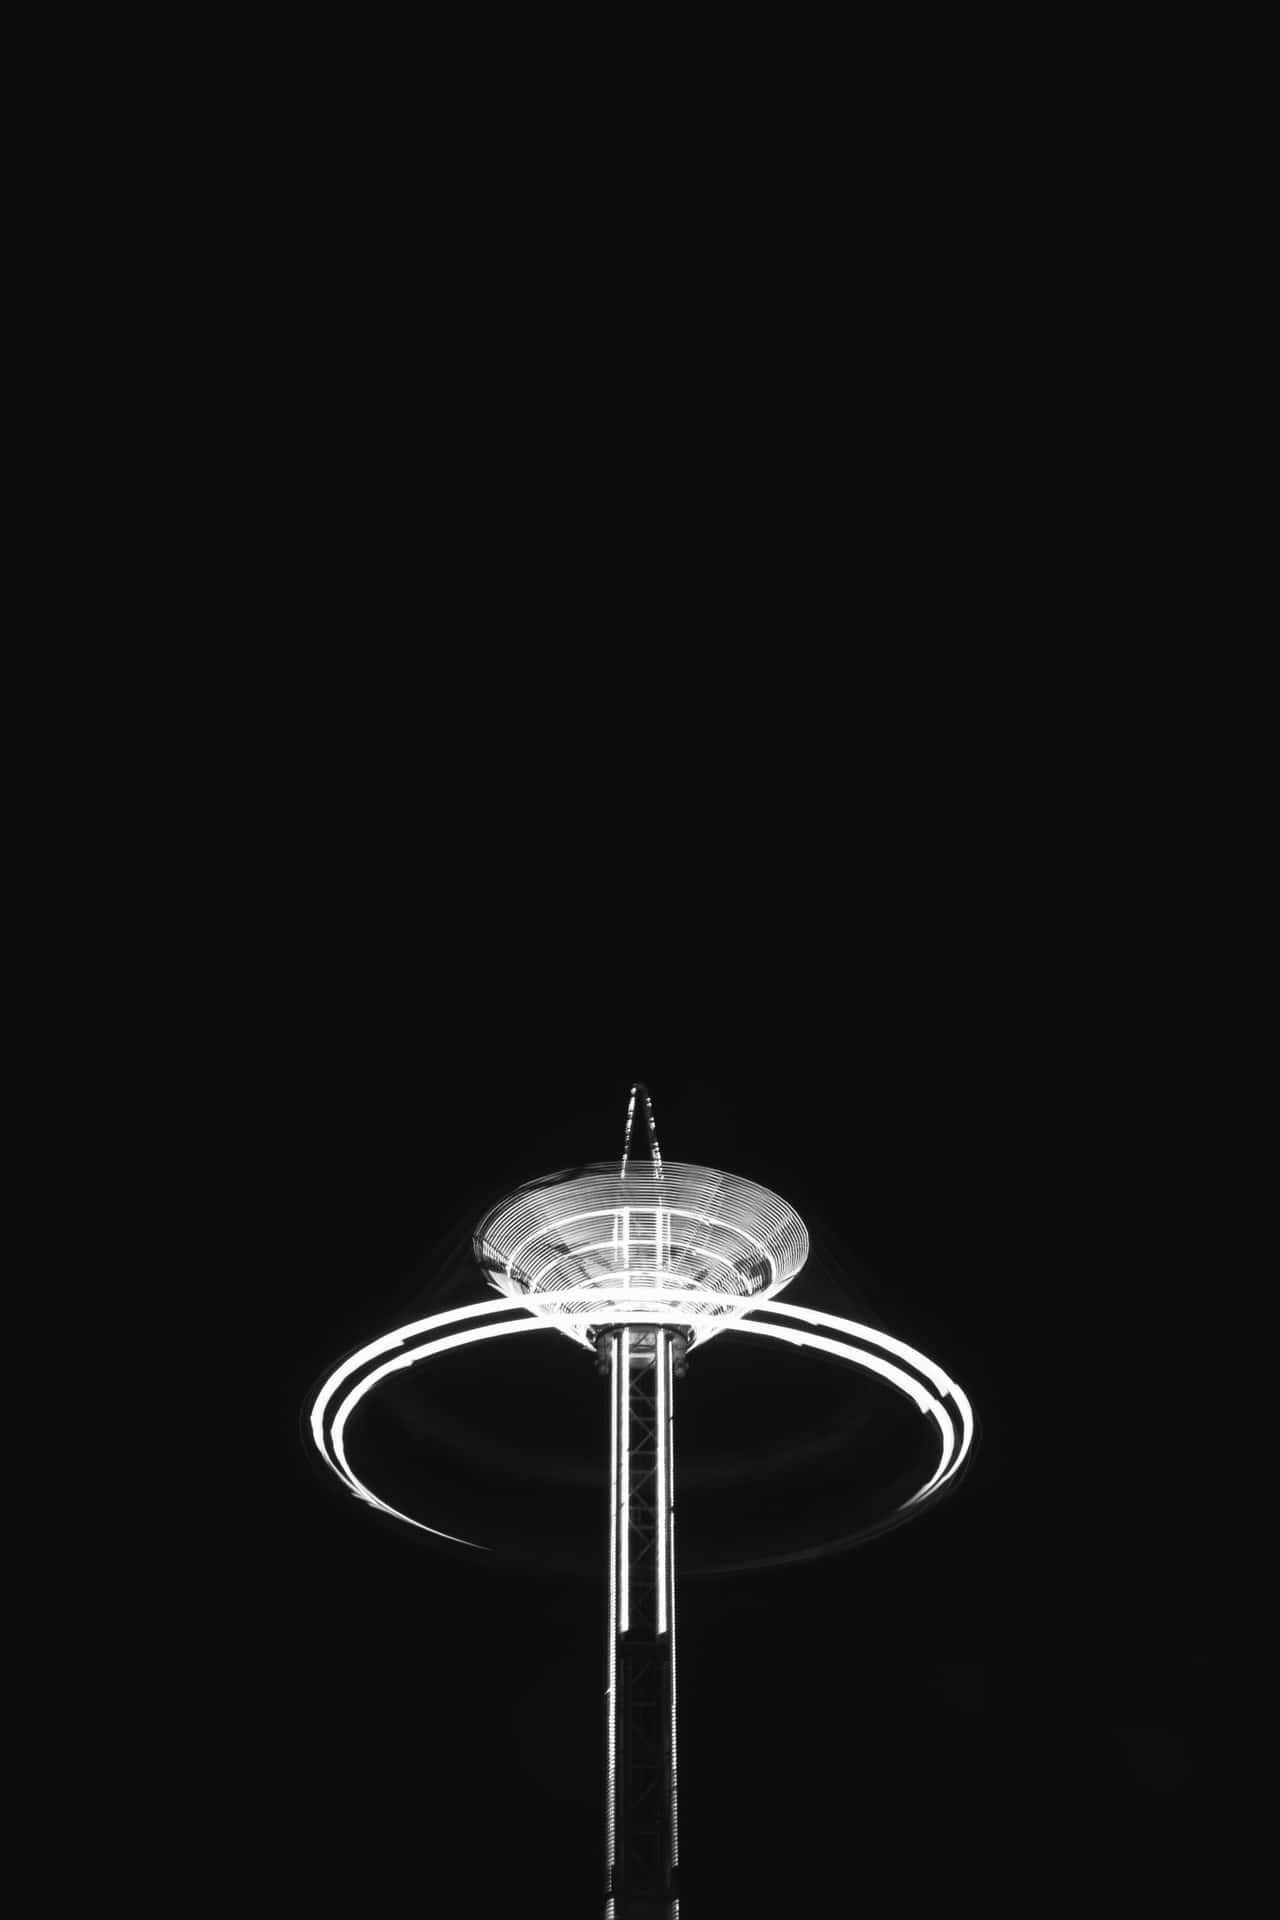 A Black And White Photo Of A Light Wallpaper